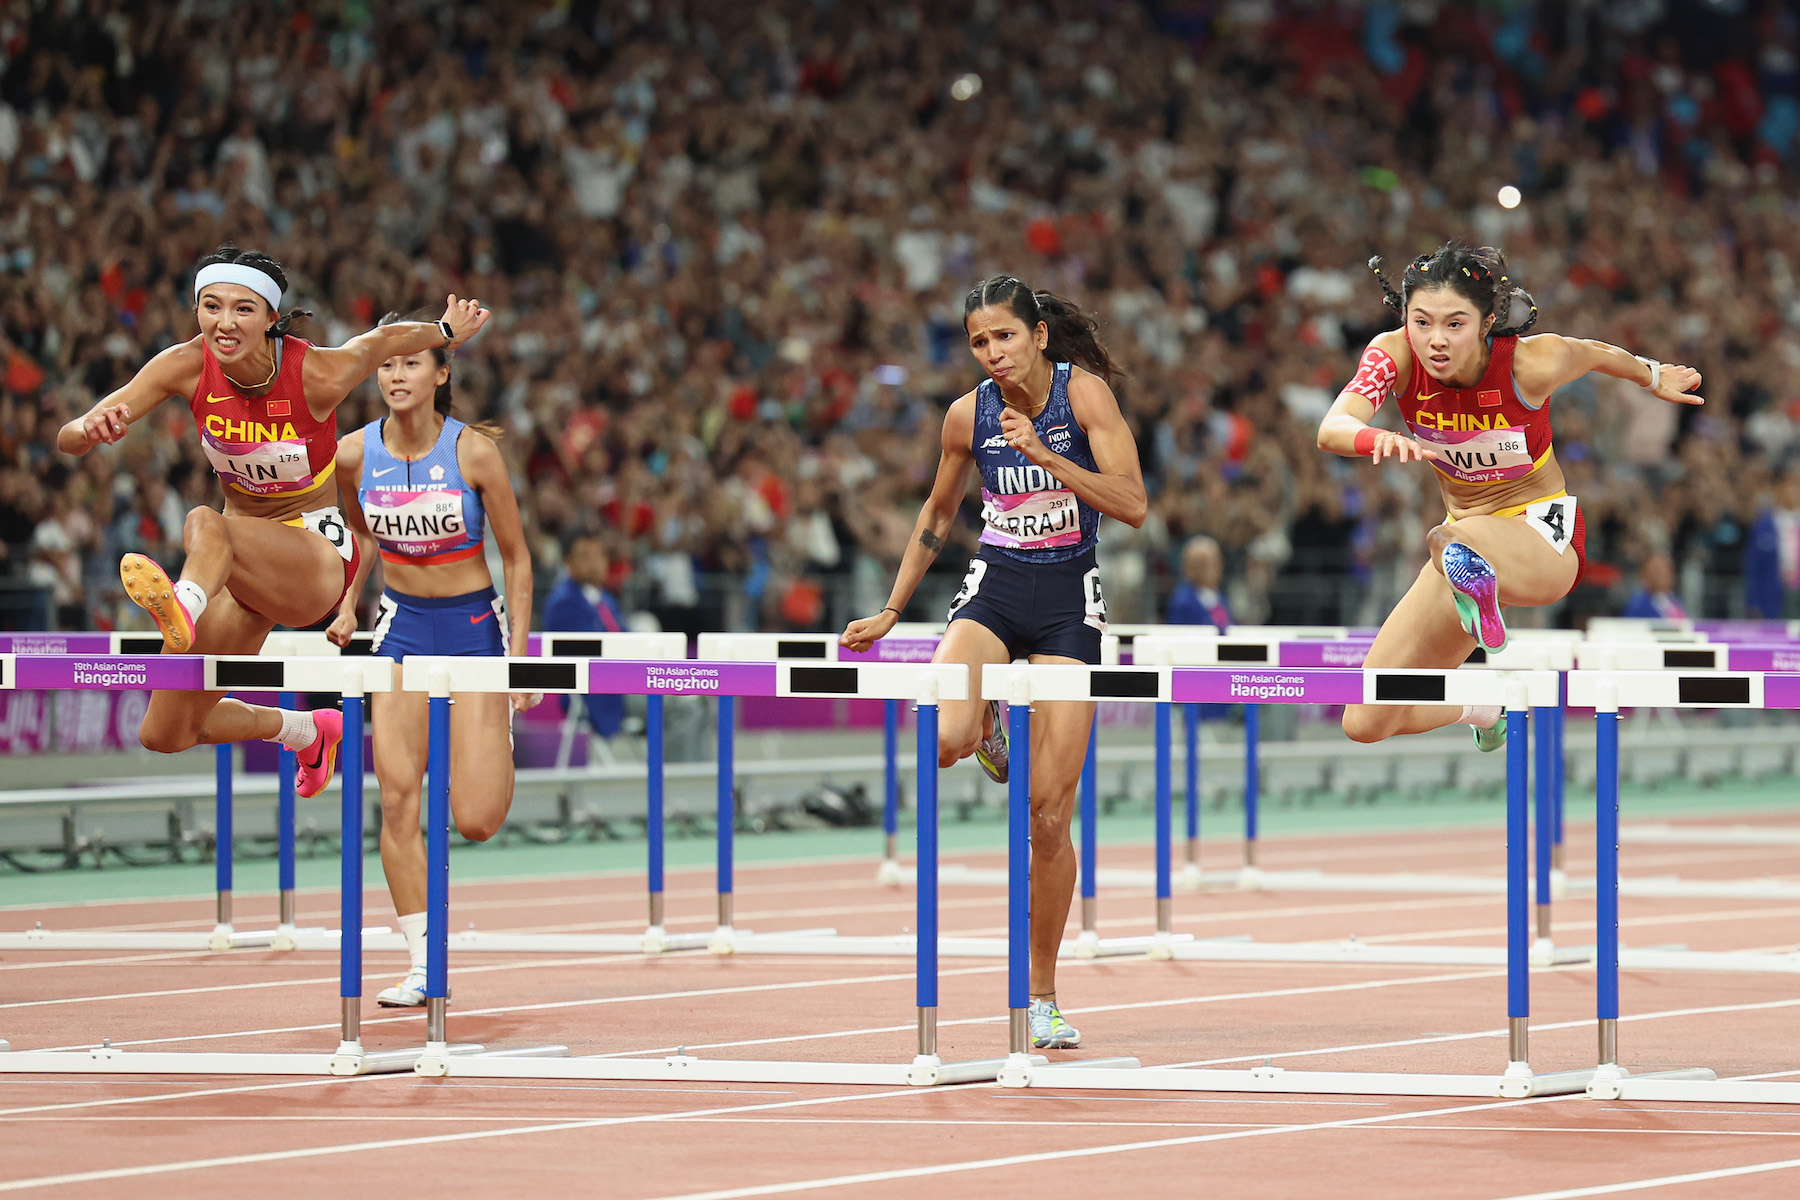 LinYuwei (L) of China, Wu Yanni (R) compete in the women's 100m hurdles at the Asian games at Hangzhou, China.